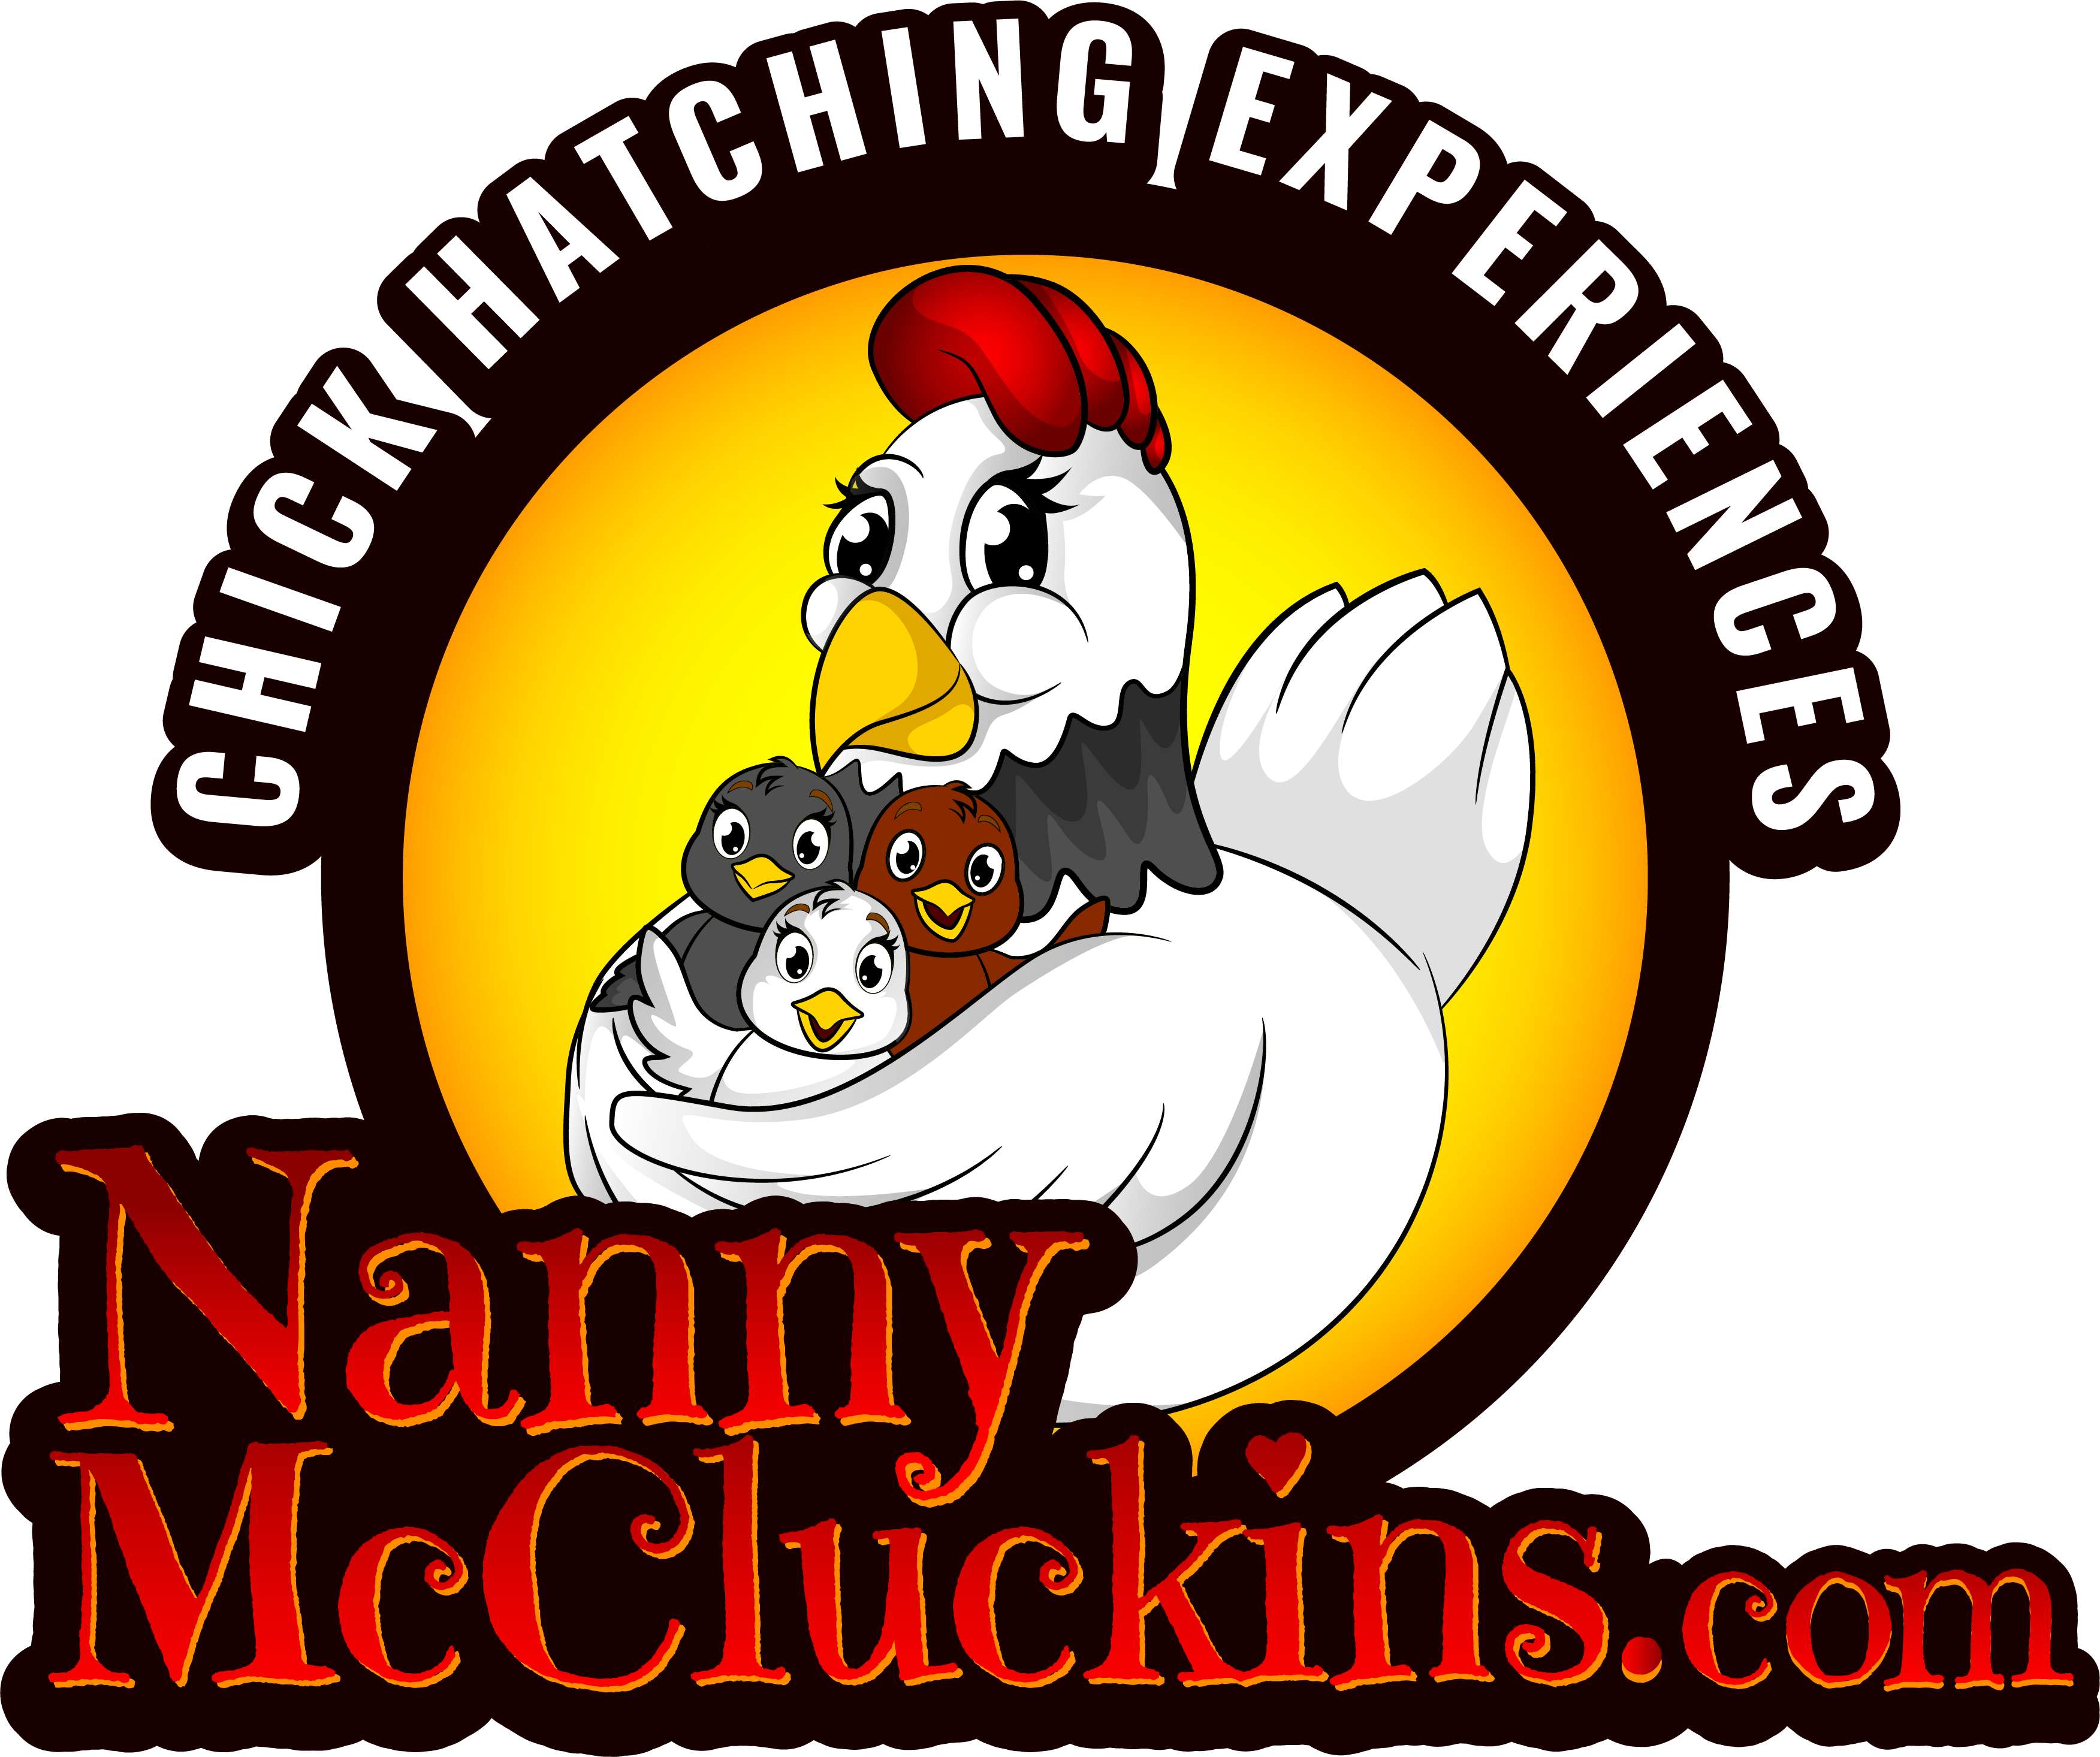 Nanny McCluckins Chick Hatching Experiences